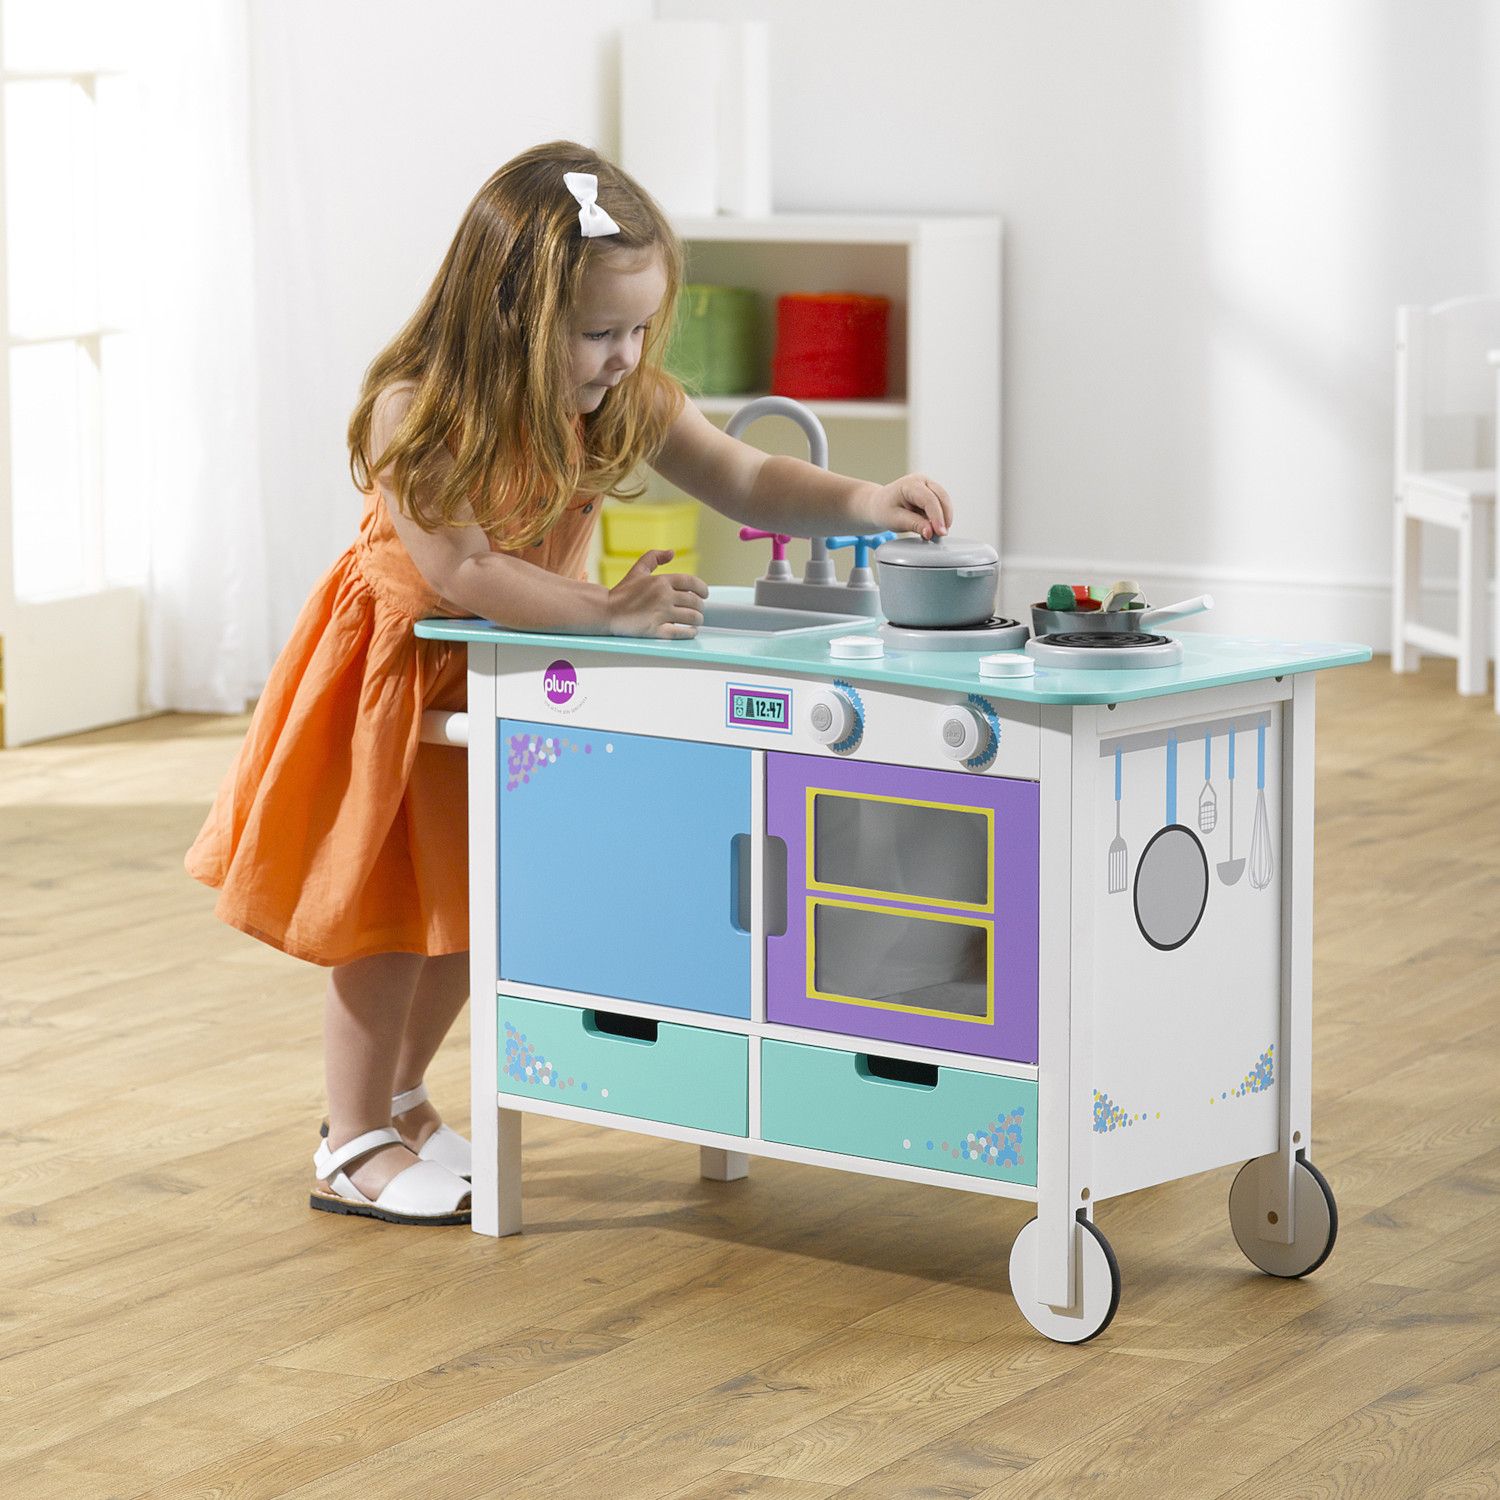 Plum Play Cook-a-Lot Trolley Wooden Play Kitchens - image 3 of 12